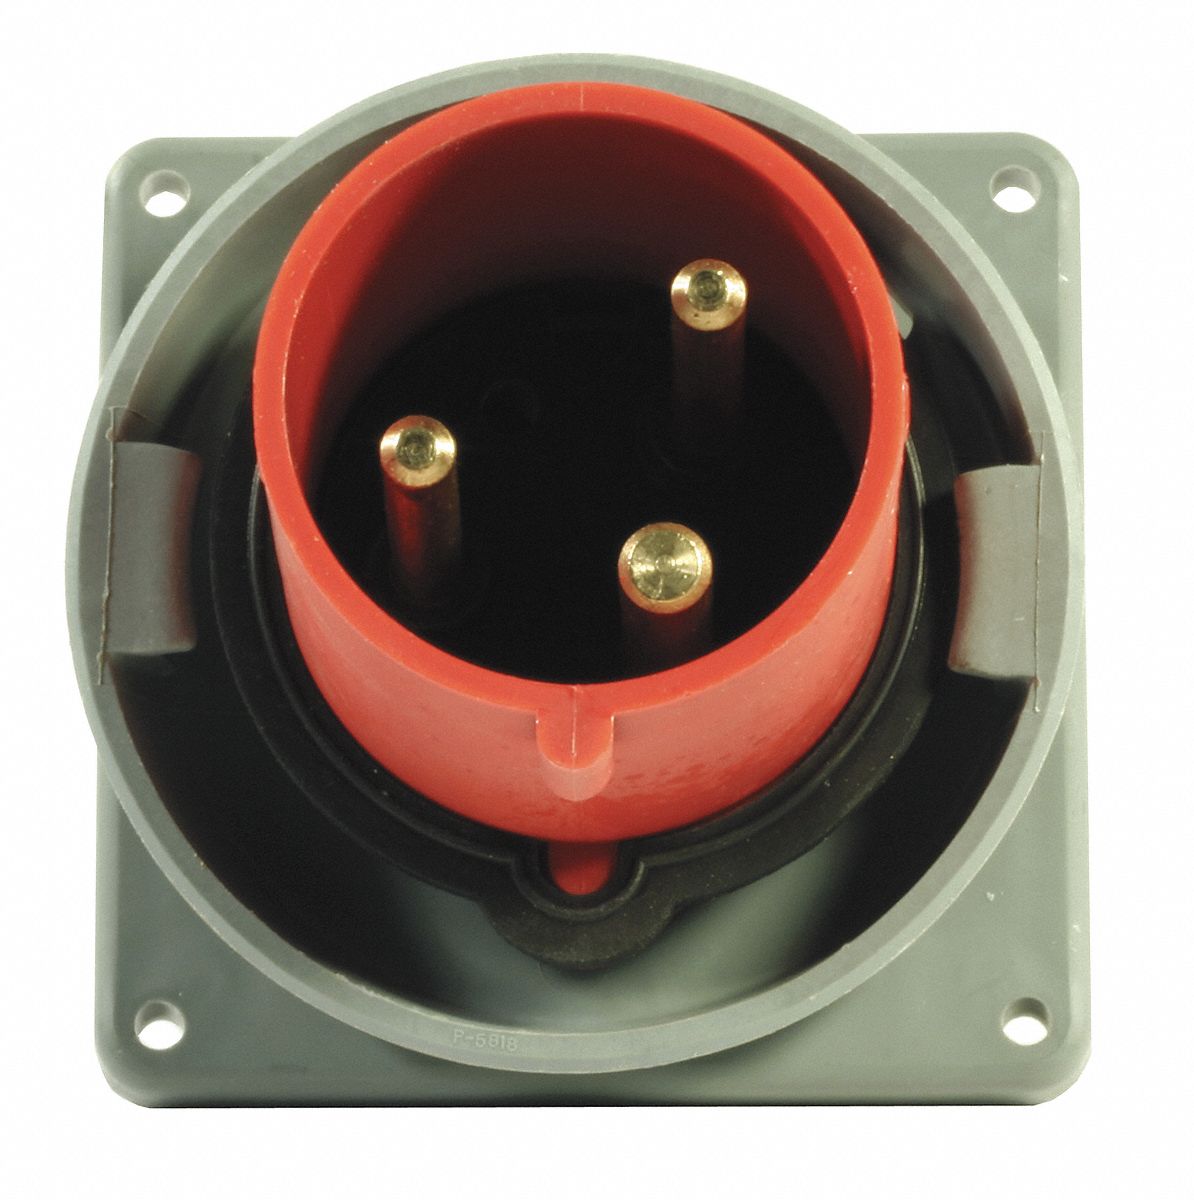 3D675 - IEC Pin and Sleeve Inlet 100A 480V Red